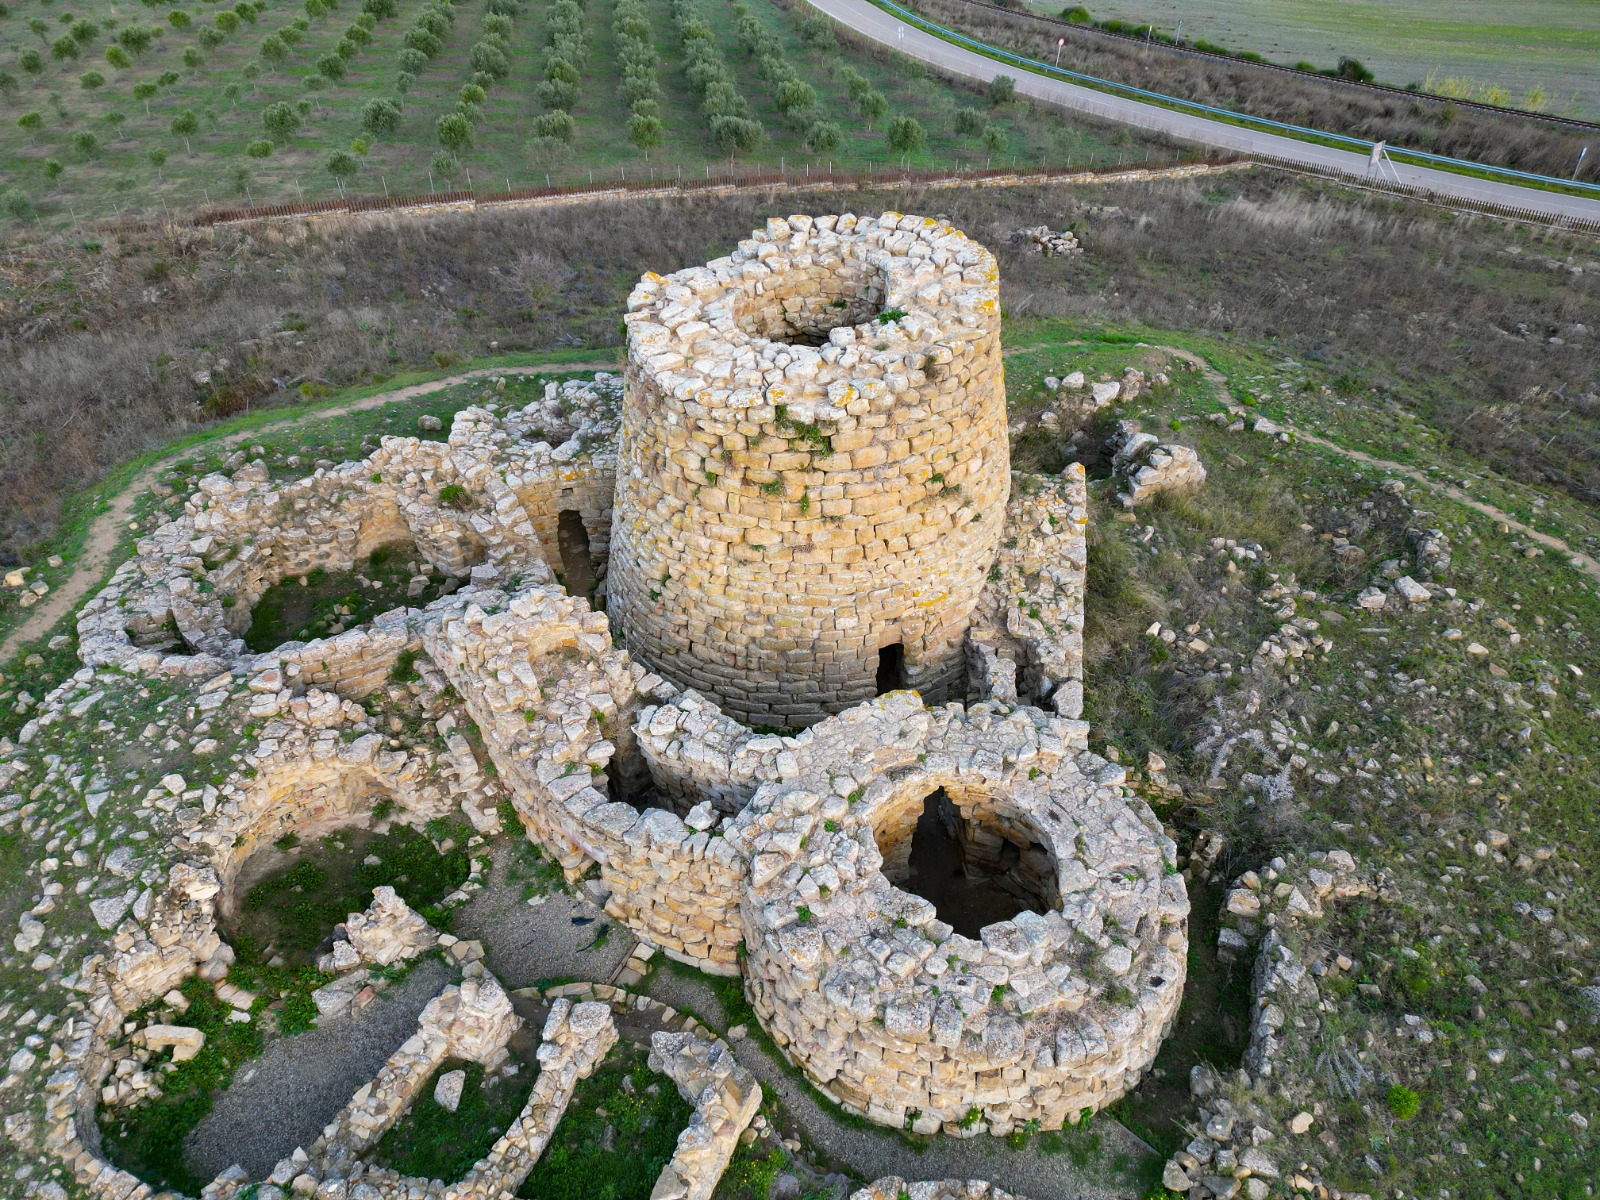 Enjoy Shore Excursion History and Wildlife from Cagliari Port. View over Nuraghe Piscu